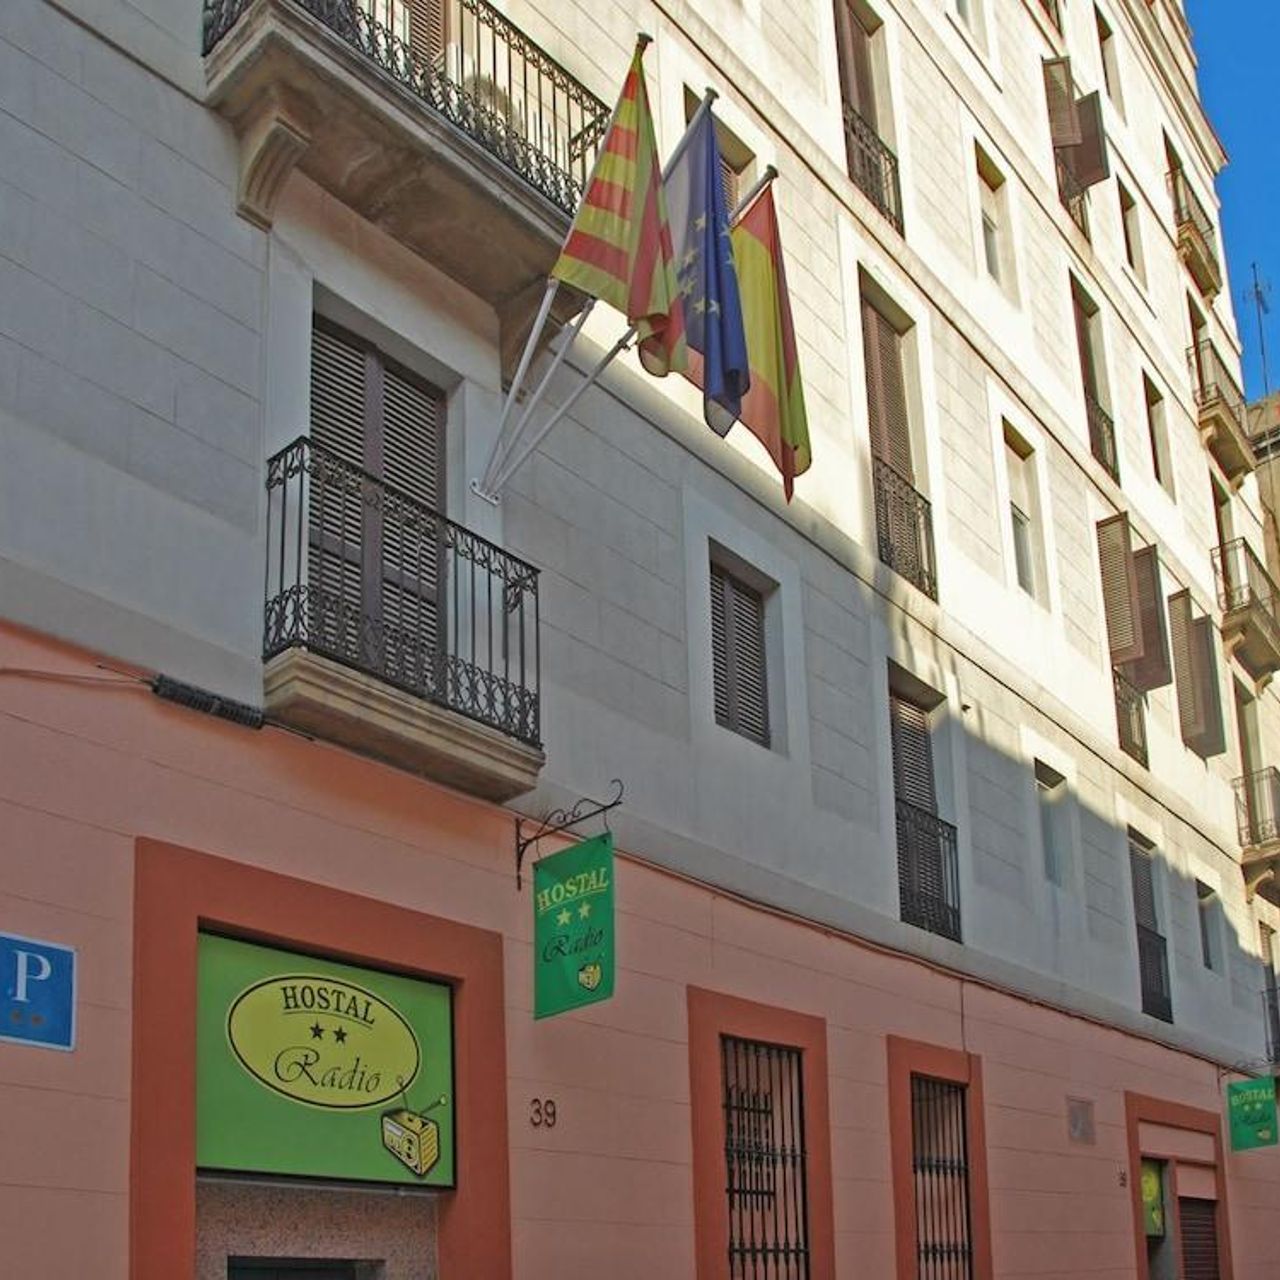 Hotel Hostal Radio - Barcelona - Great prices at HOTEL INFO